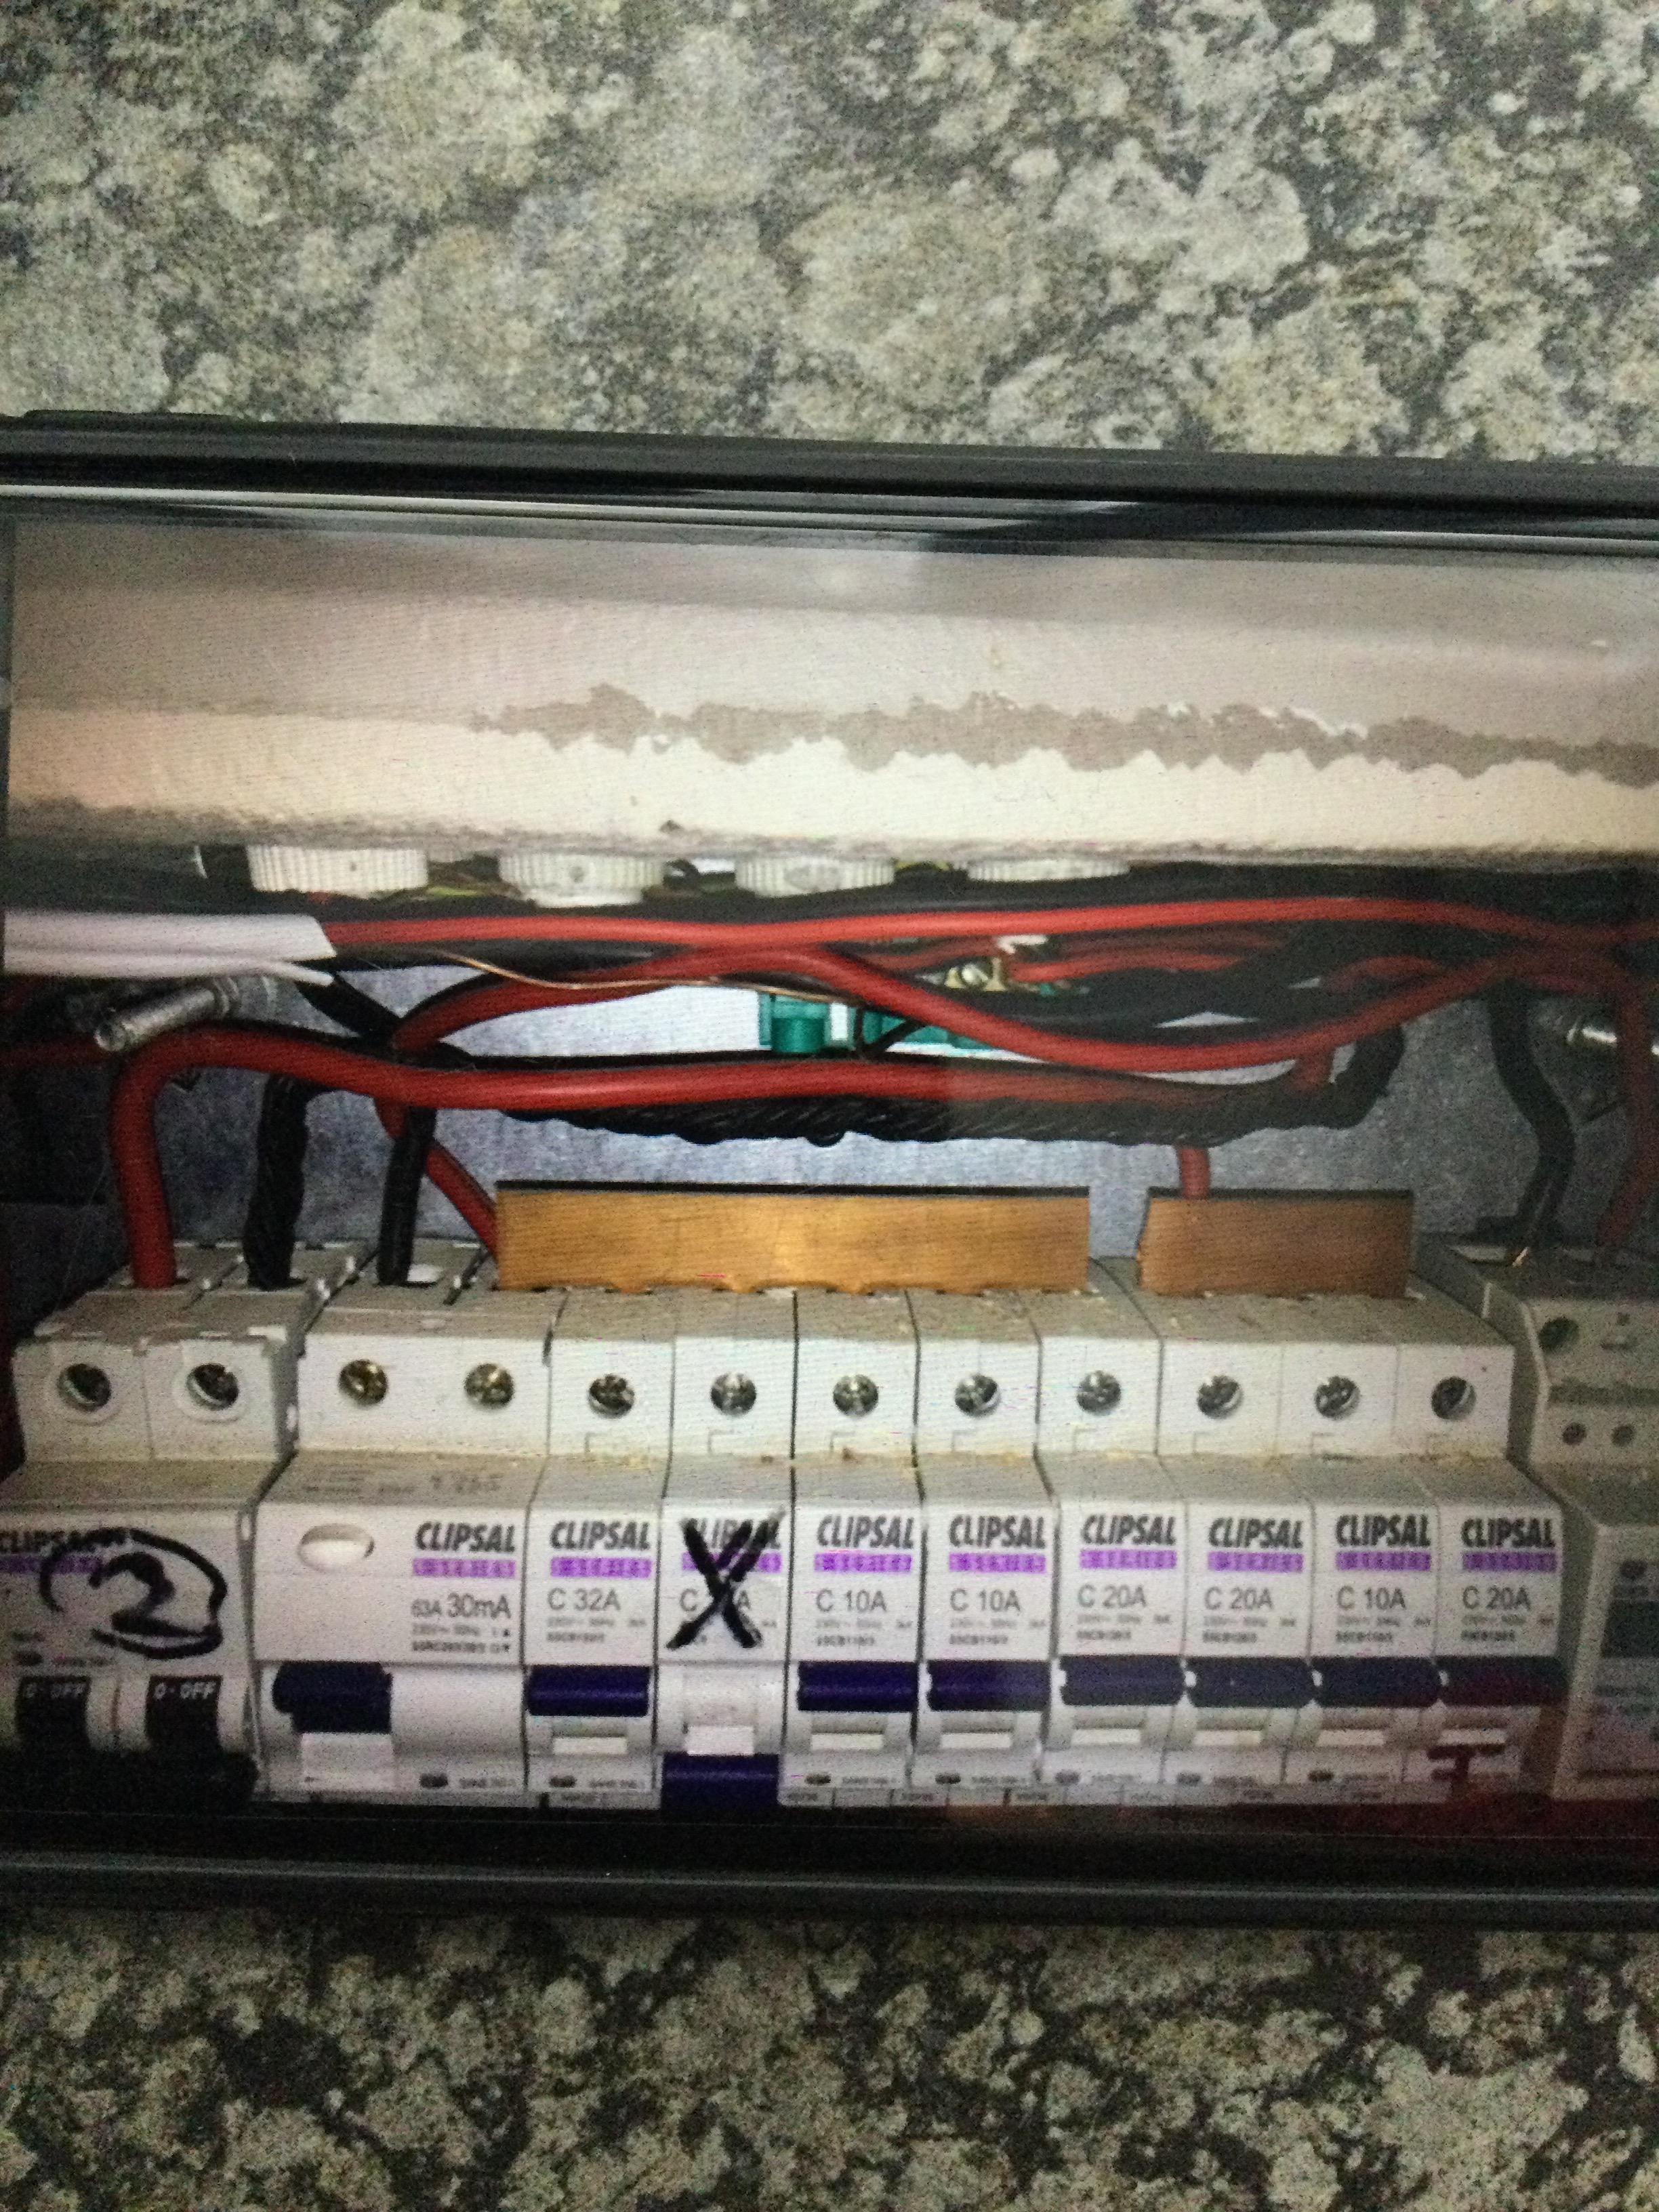 DB wiring question - Questions & Answers? - Power Forum - Renewable